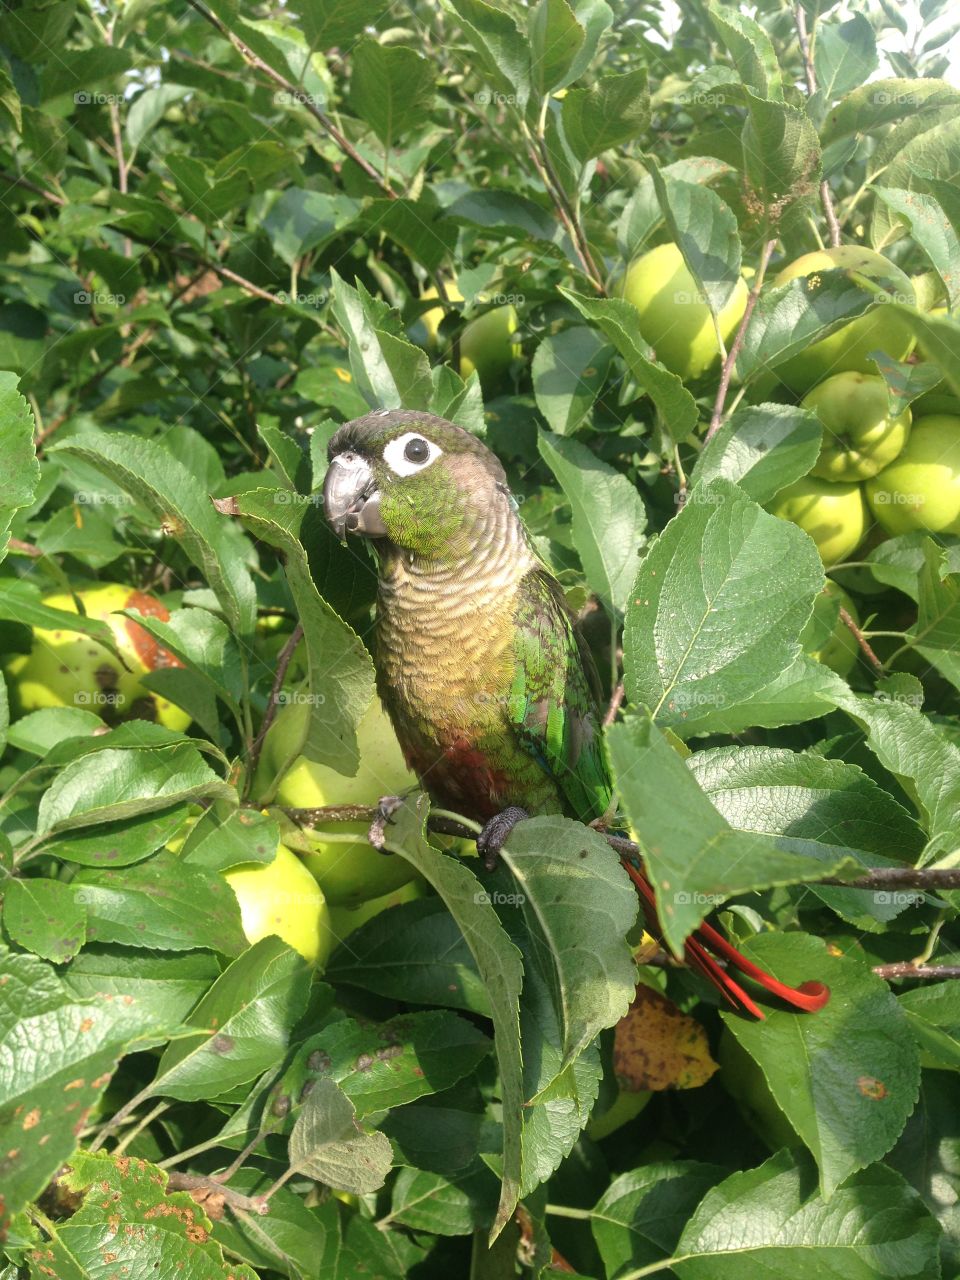 Green cheek conure. This is my baby in our Apple tree. He simply loved it
